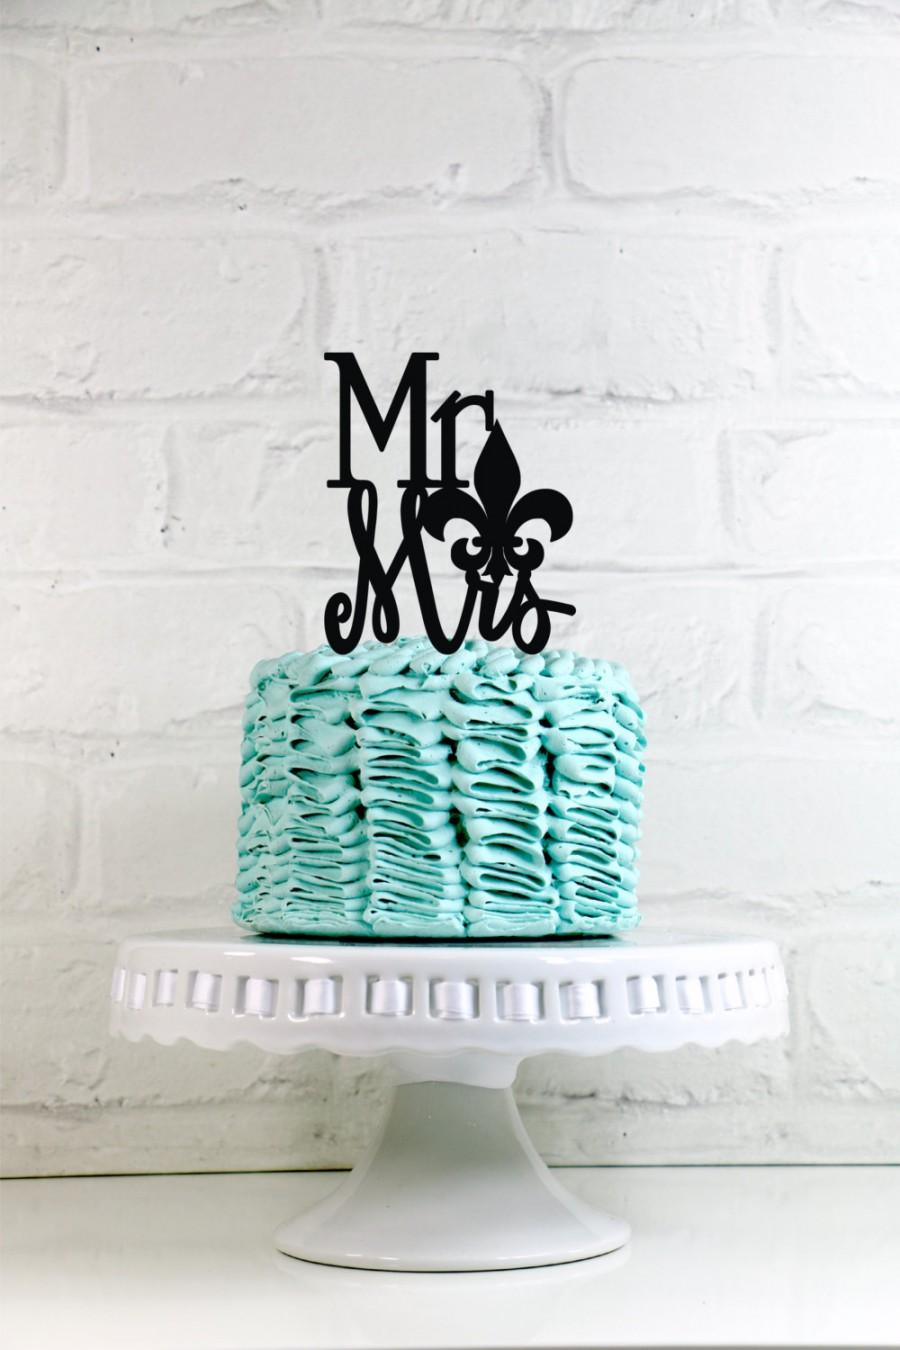 Hochzeit - Mr & Mrs Fleur de lis Wedding Cake Topper or Sign Perfect for New Orleans themed Weddings